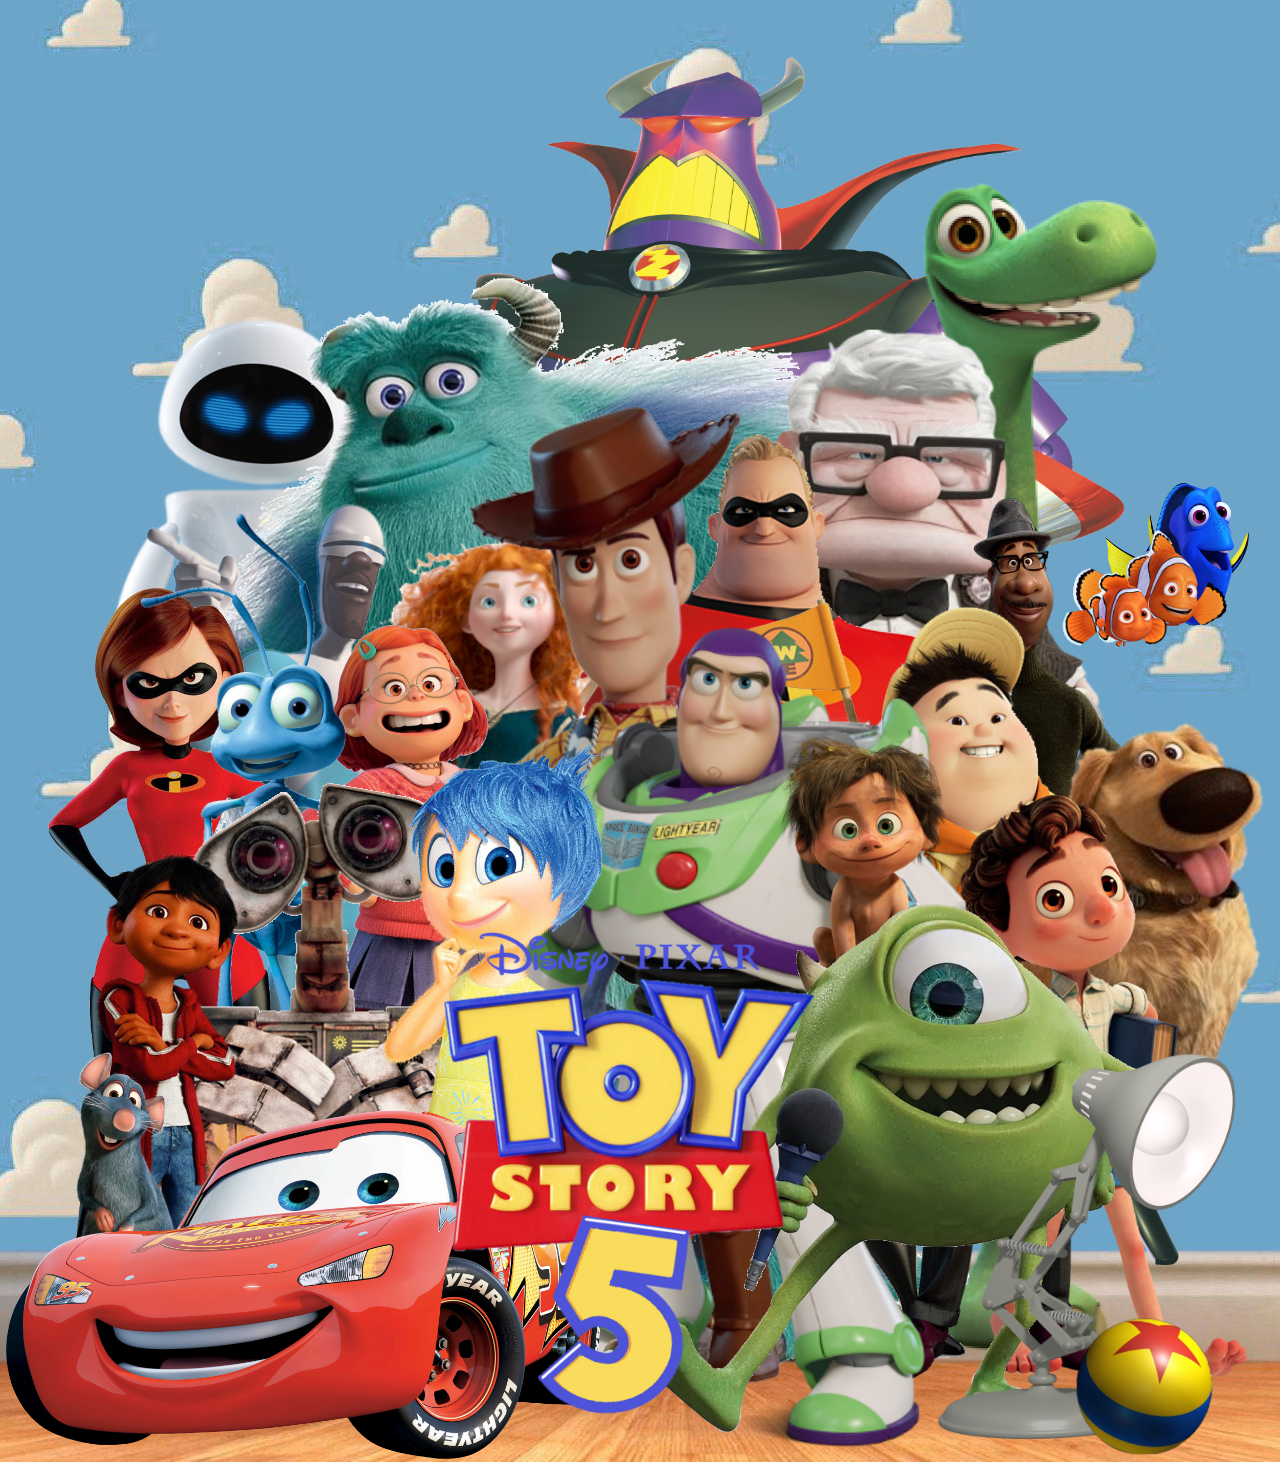 Toy Story 5 plot theories flood Twitter as Disney announces sequel